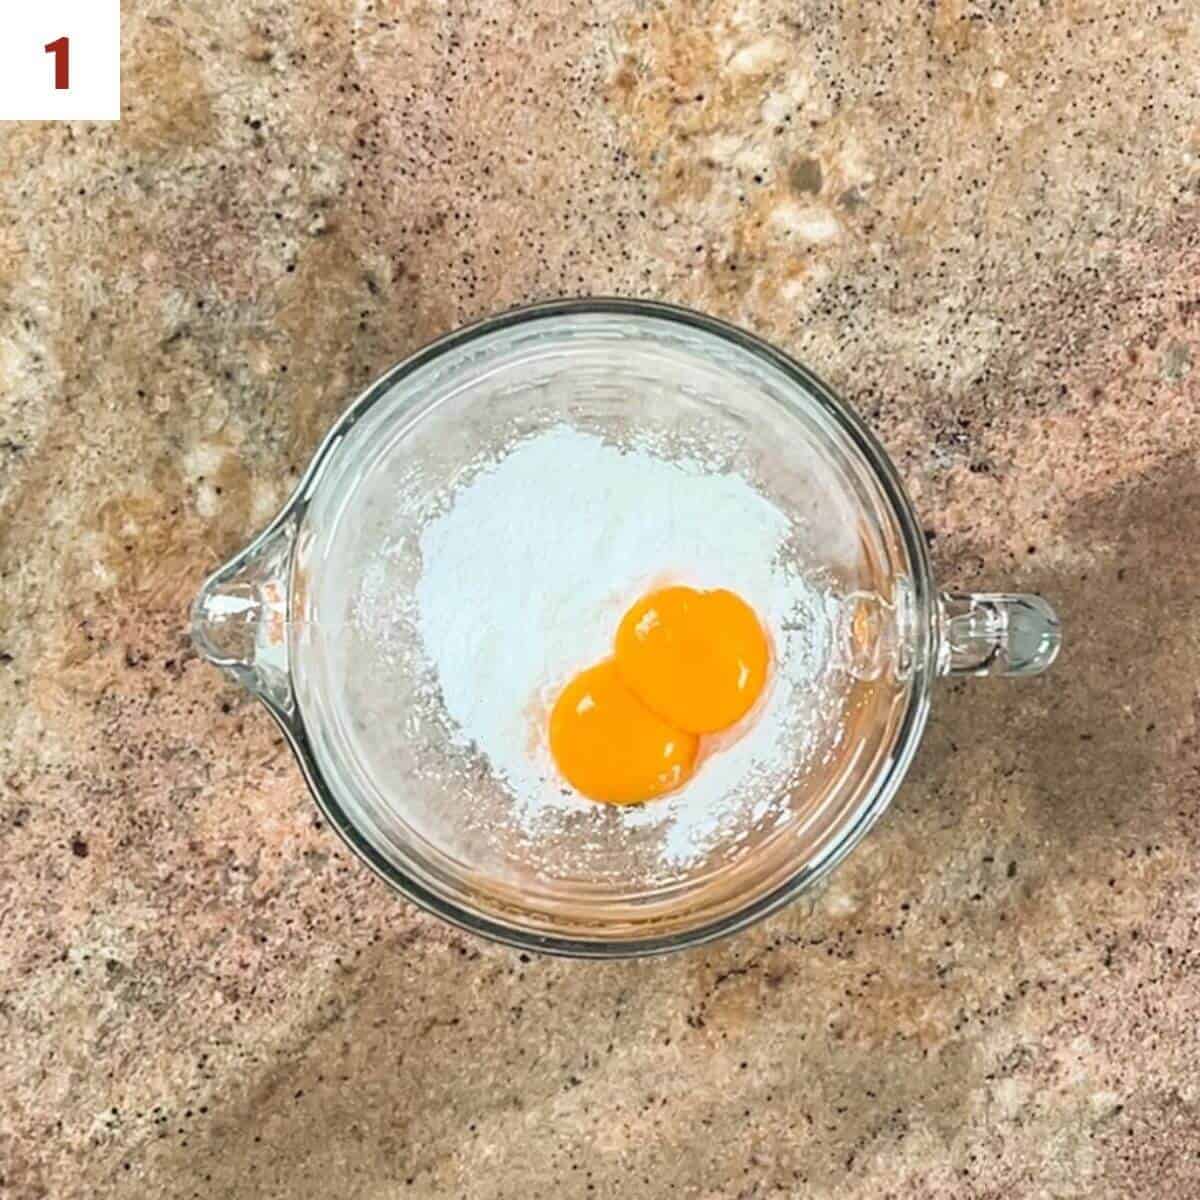 Egg yolks and cornstarch in a glass bowl from overhead.